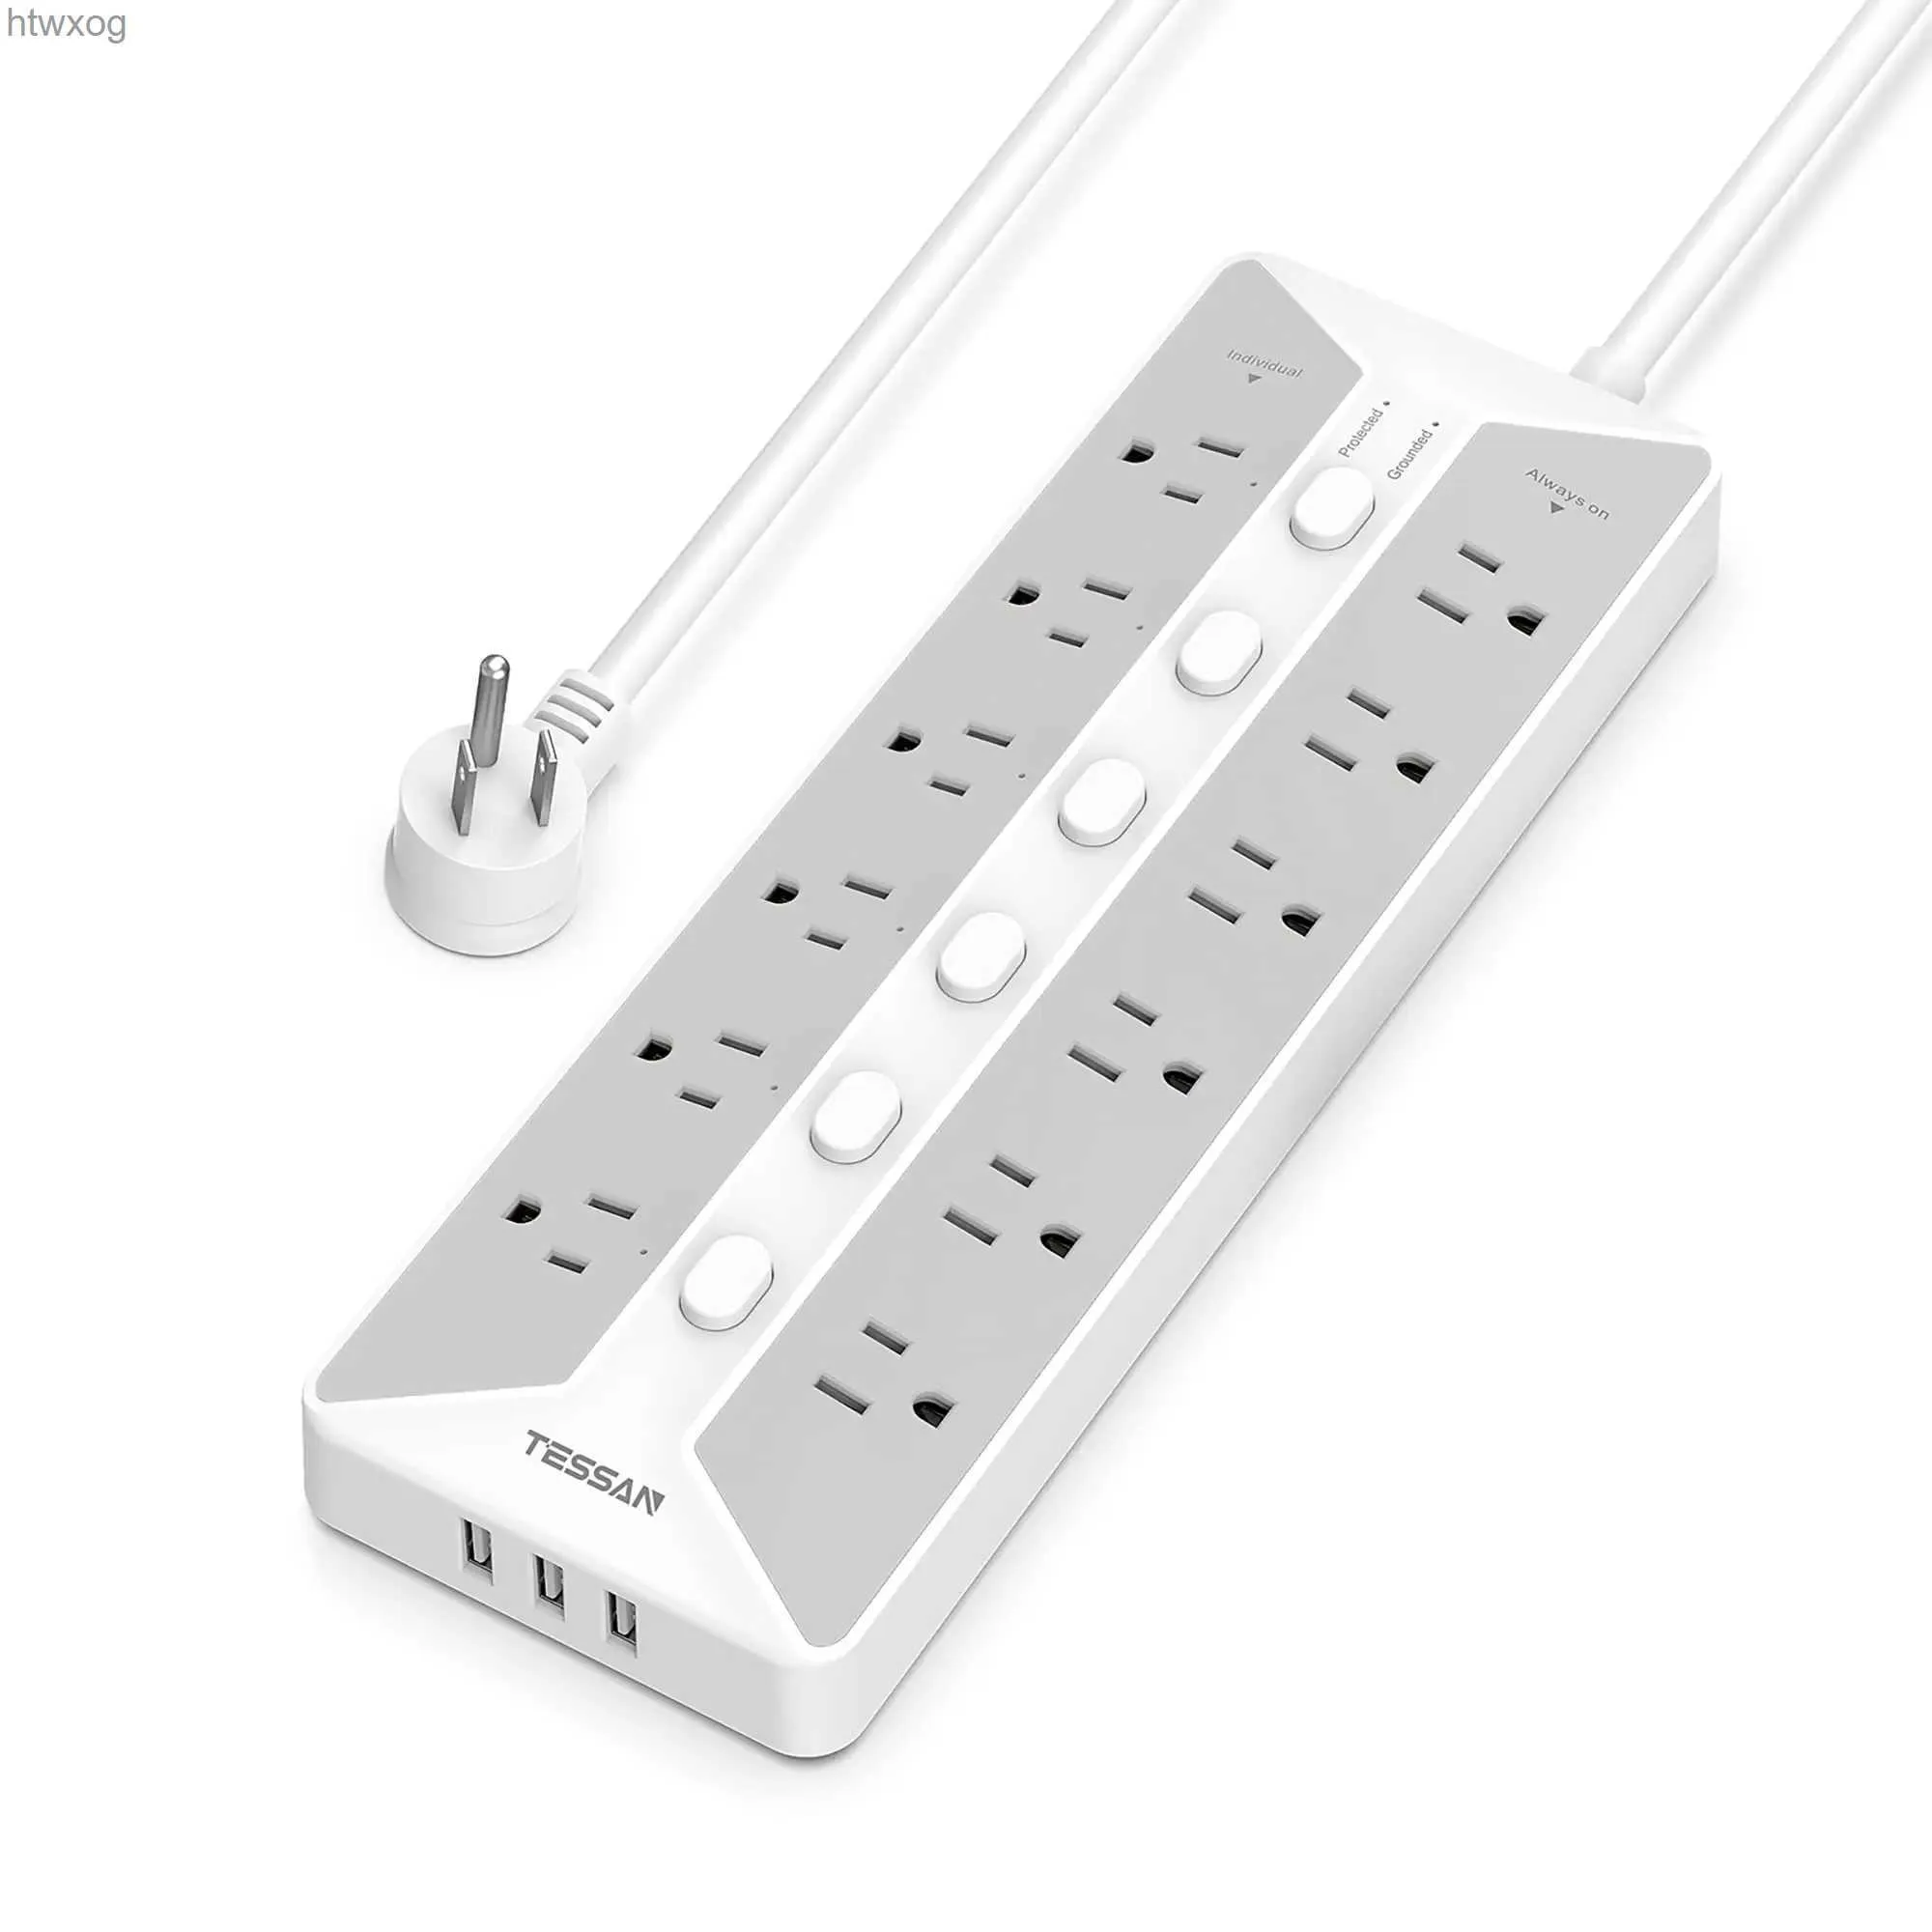 Power Cable Plug TESSAN Power Strip Surge Protector with Individual Switches 12 AC Outlets 3 USB Ports Flat Plug Power Strip wirh 6 FT Cable YQ240117